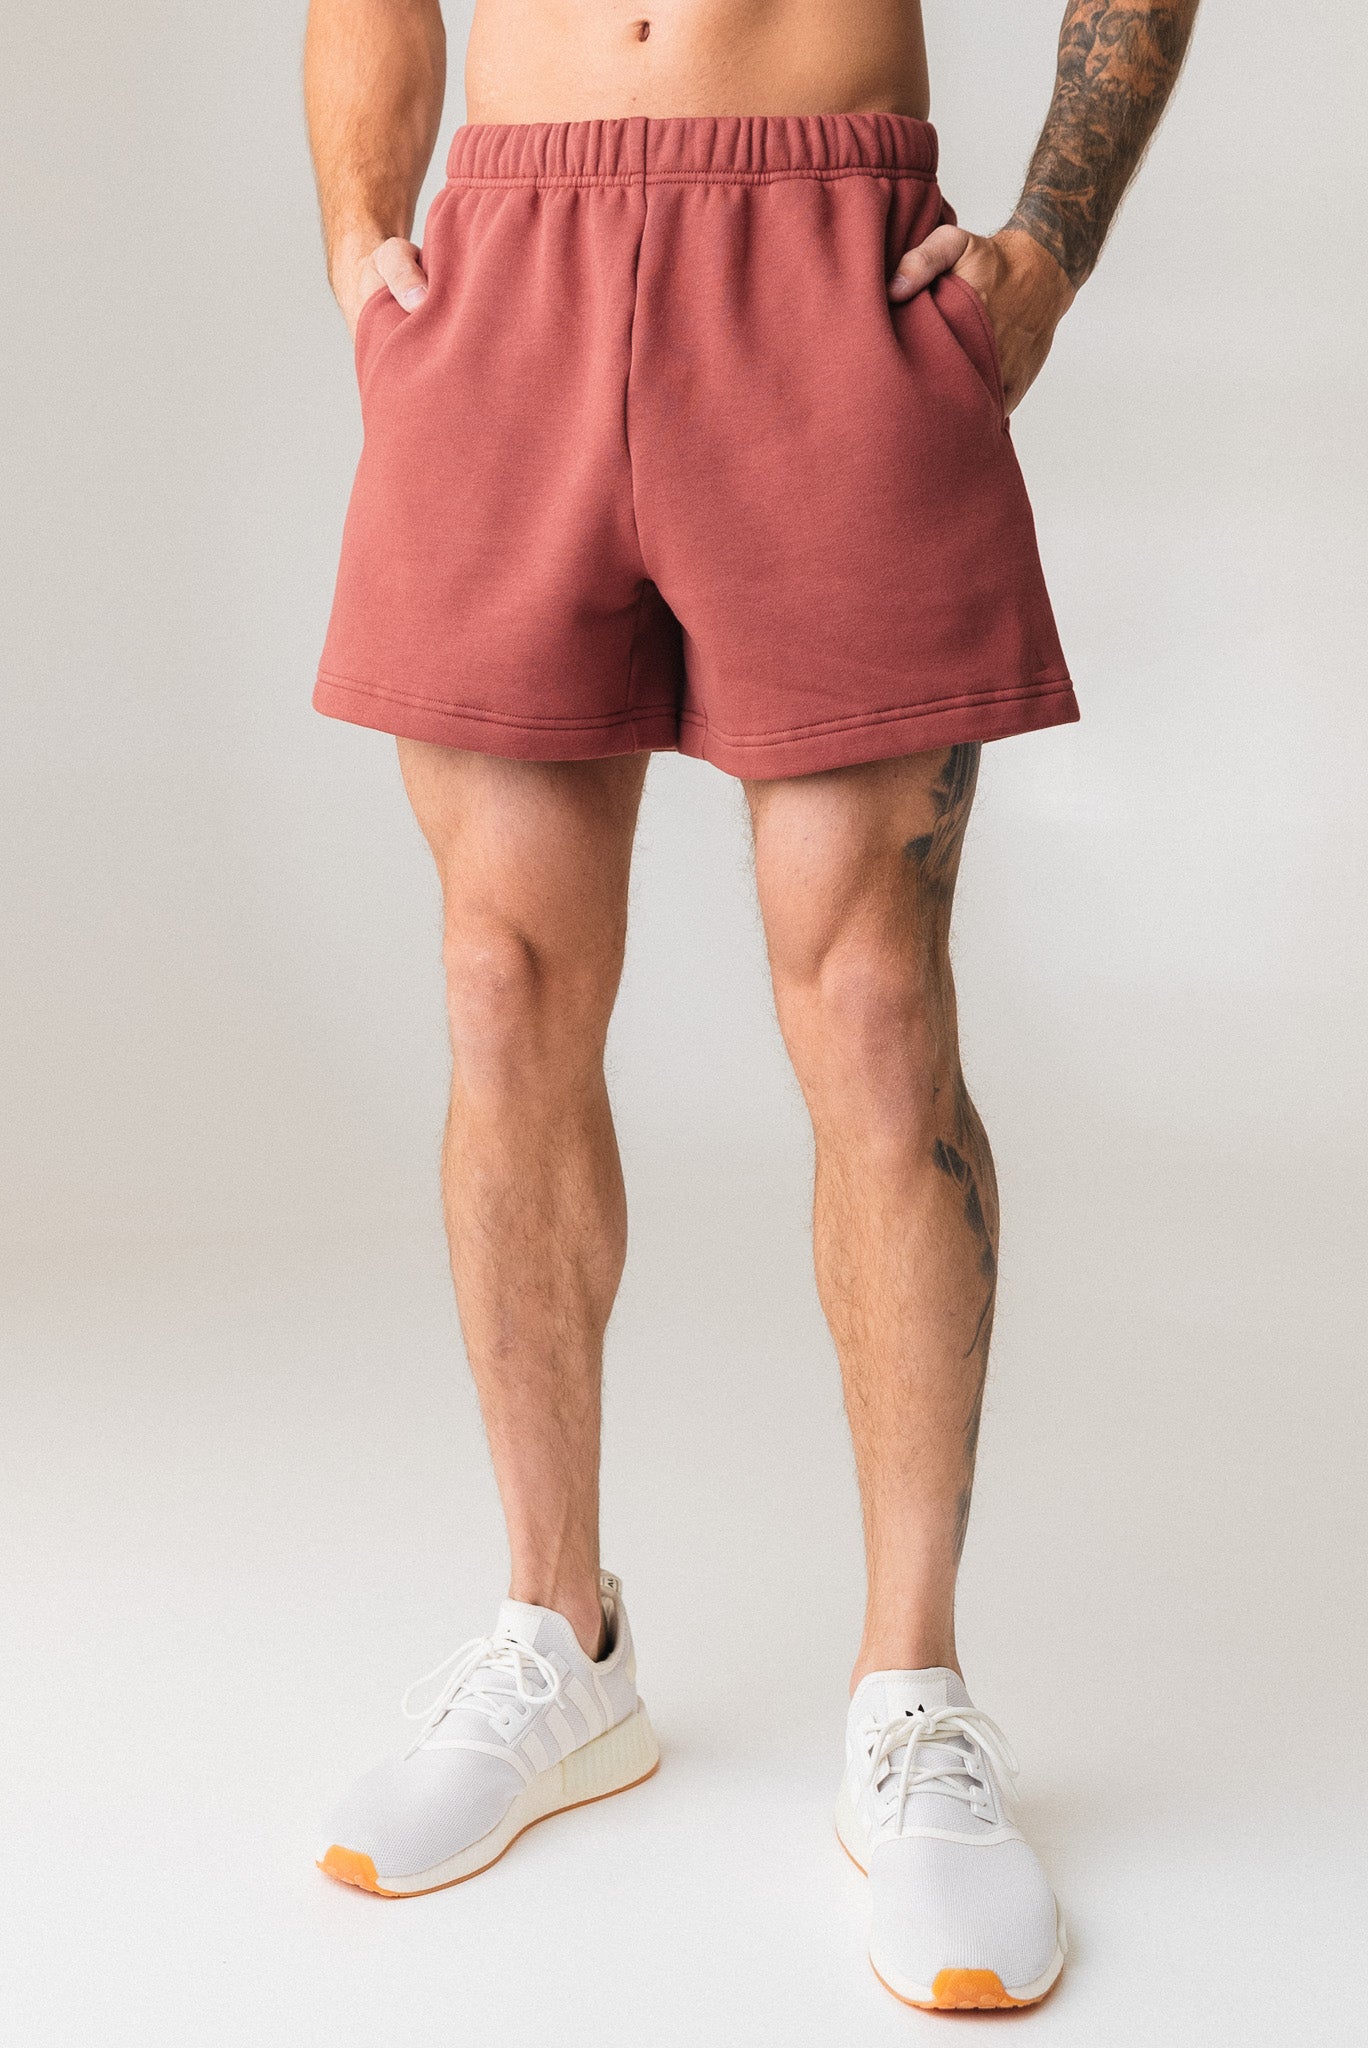 A man wearing the Vitality Uni Cozy Short in Rosewood